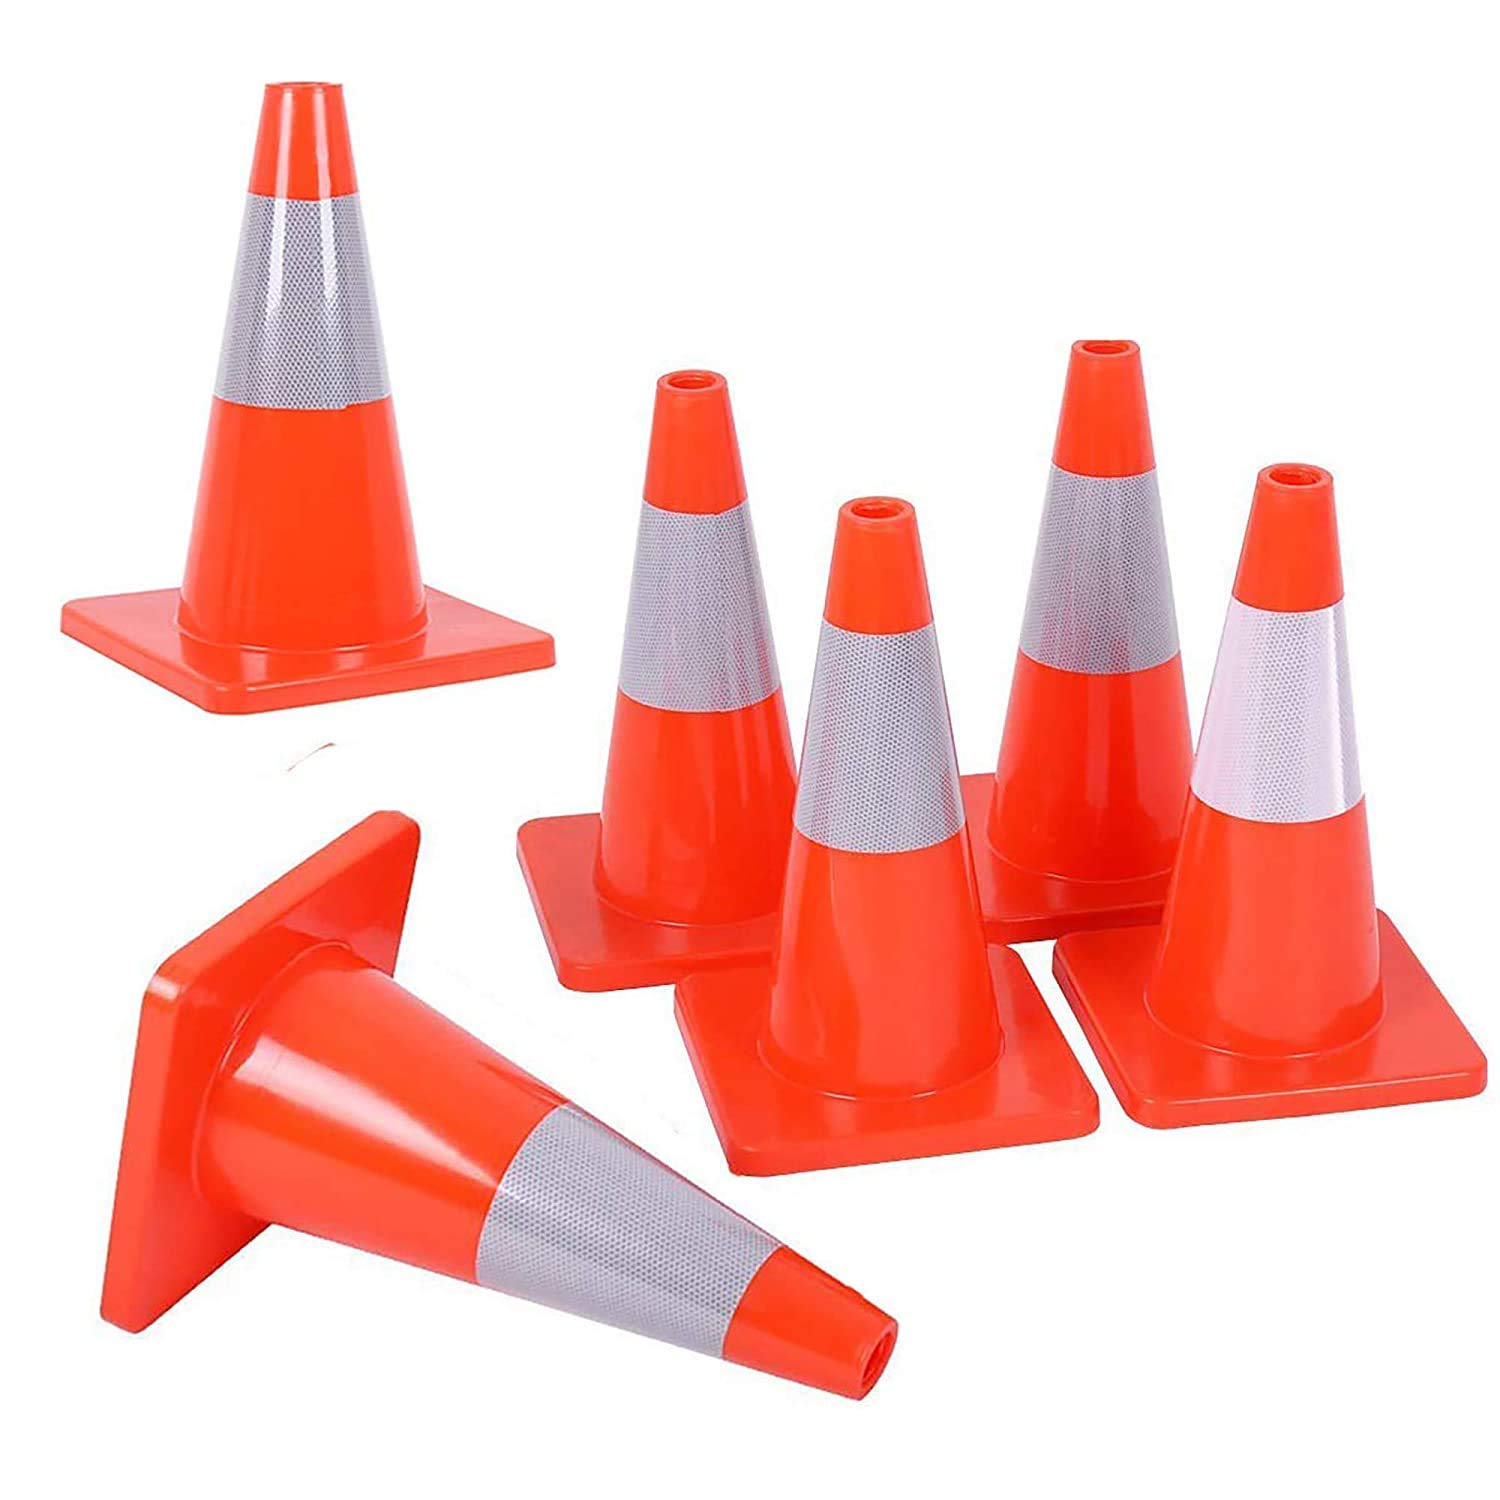 18" PVC Safety Road Parking Barrier Traffic Cone